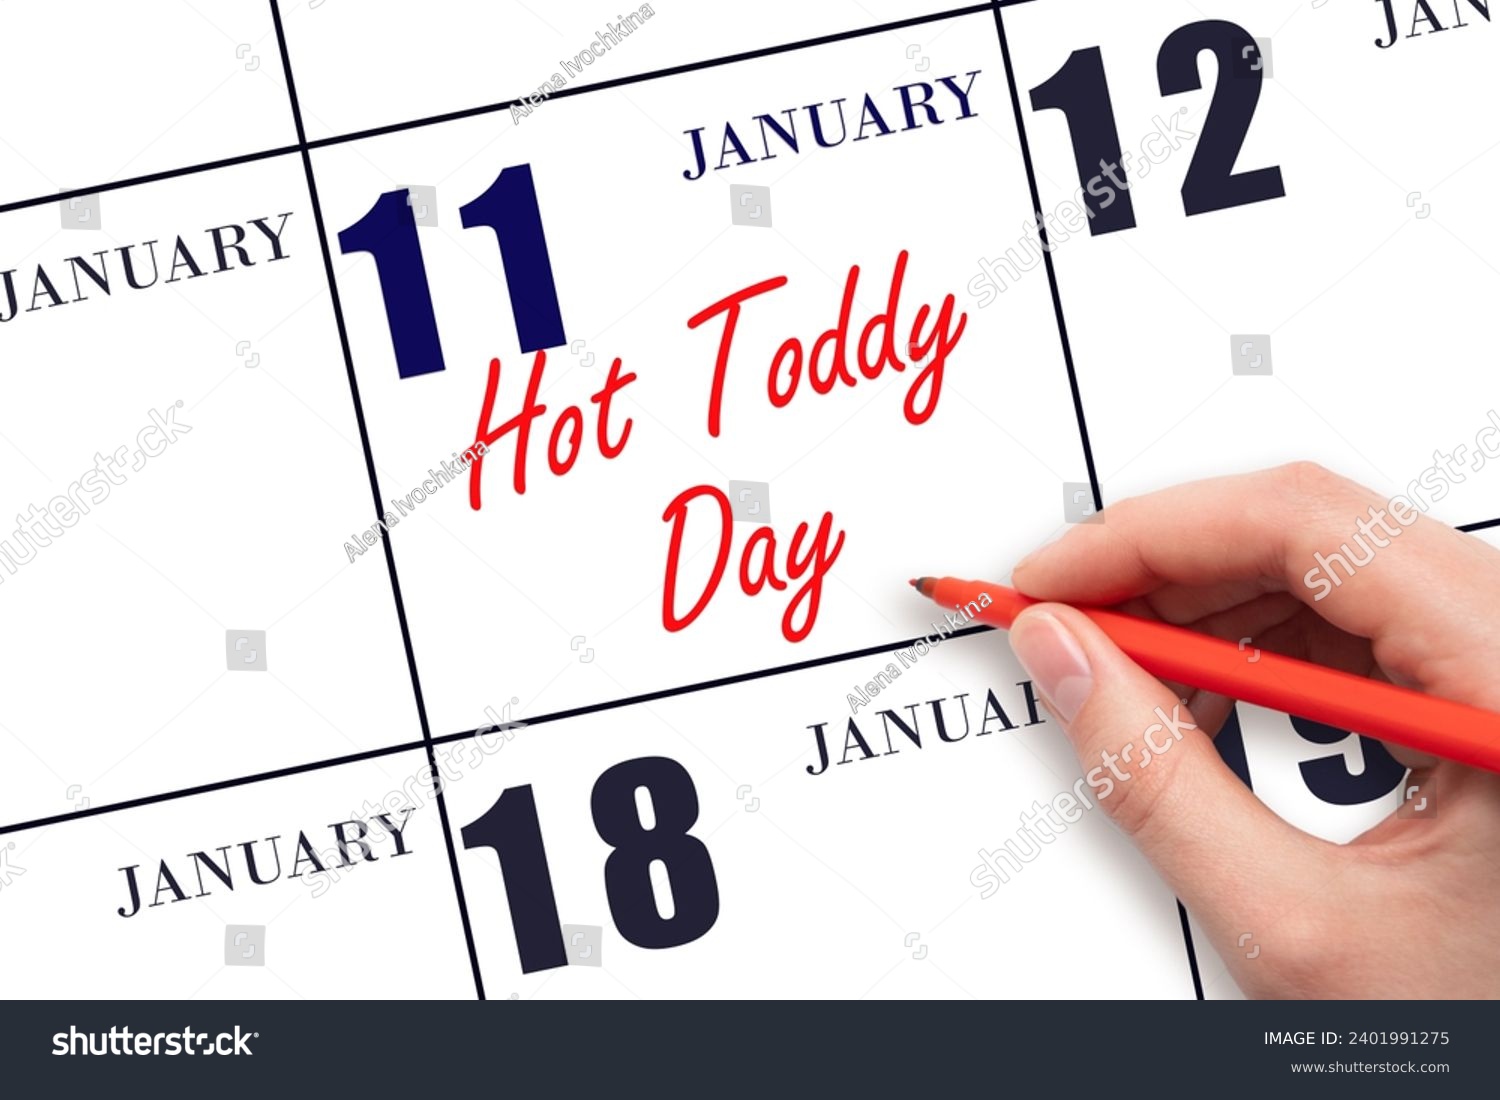 January 11. Hand writing text Hot Toddy Day on calendar date. Save the date. Holiday.  Day of the year concept. #2401991275